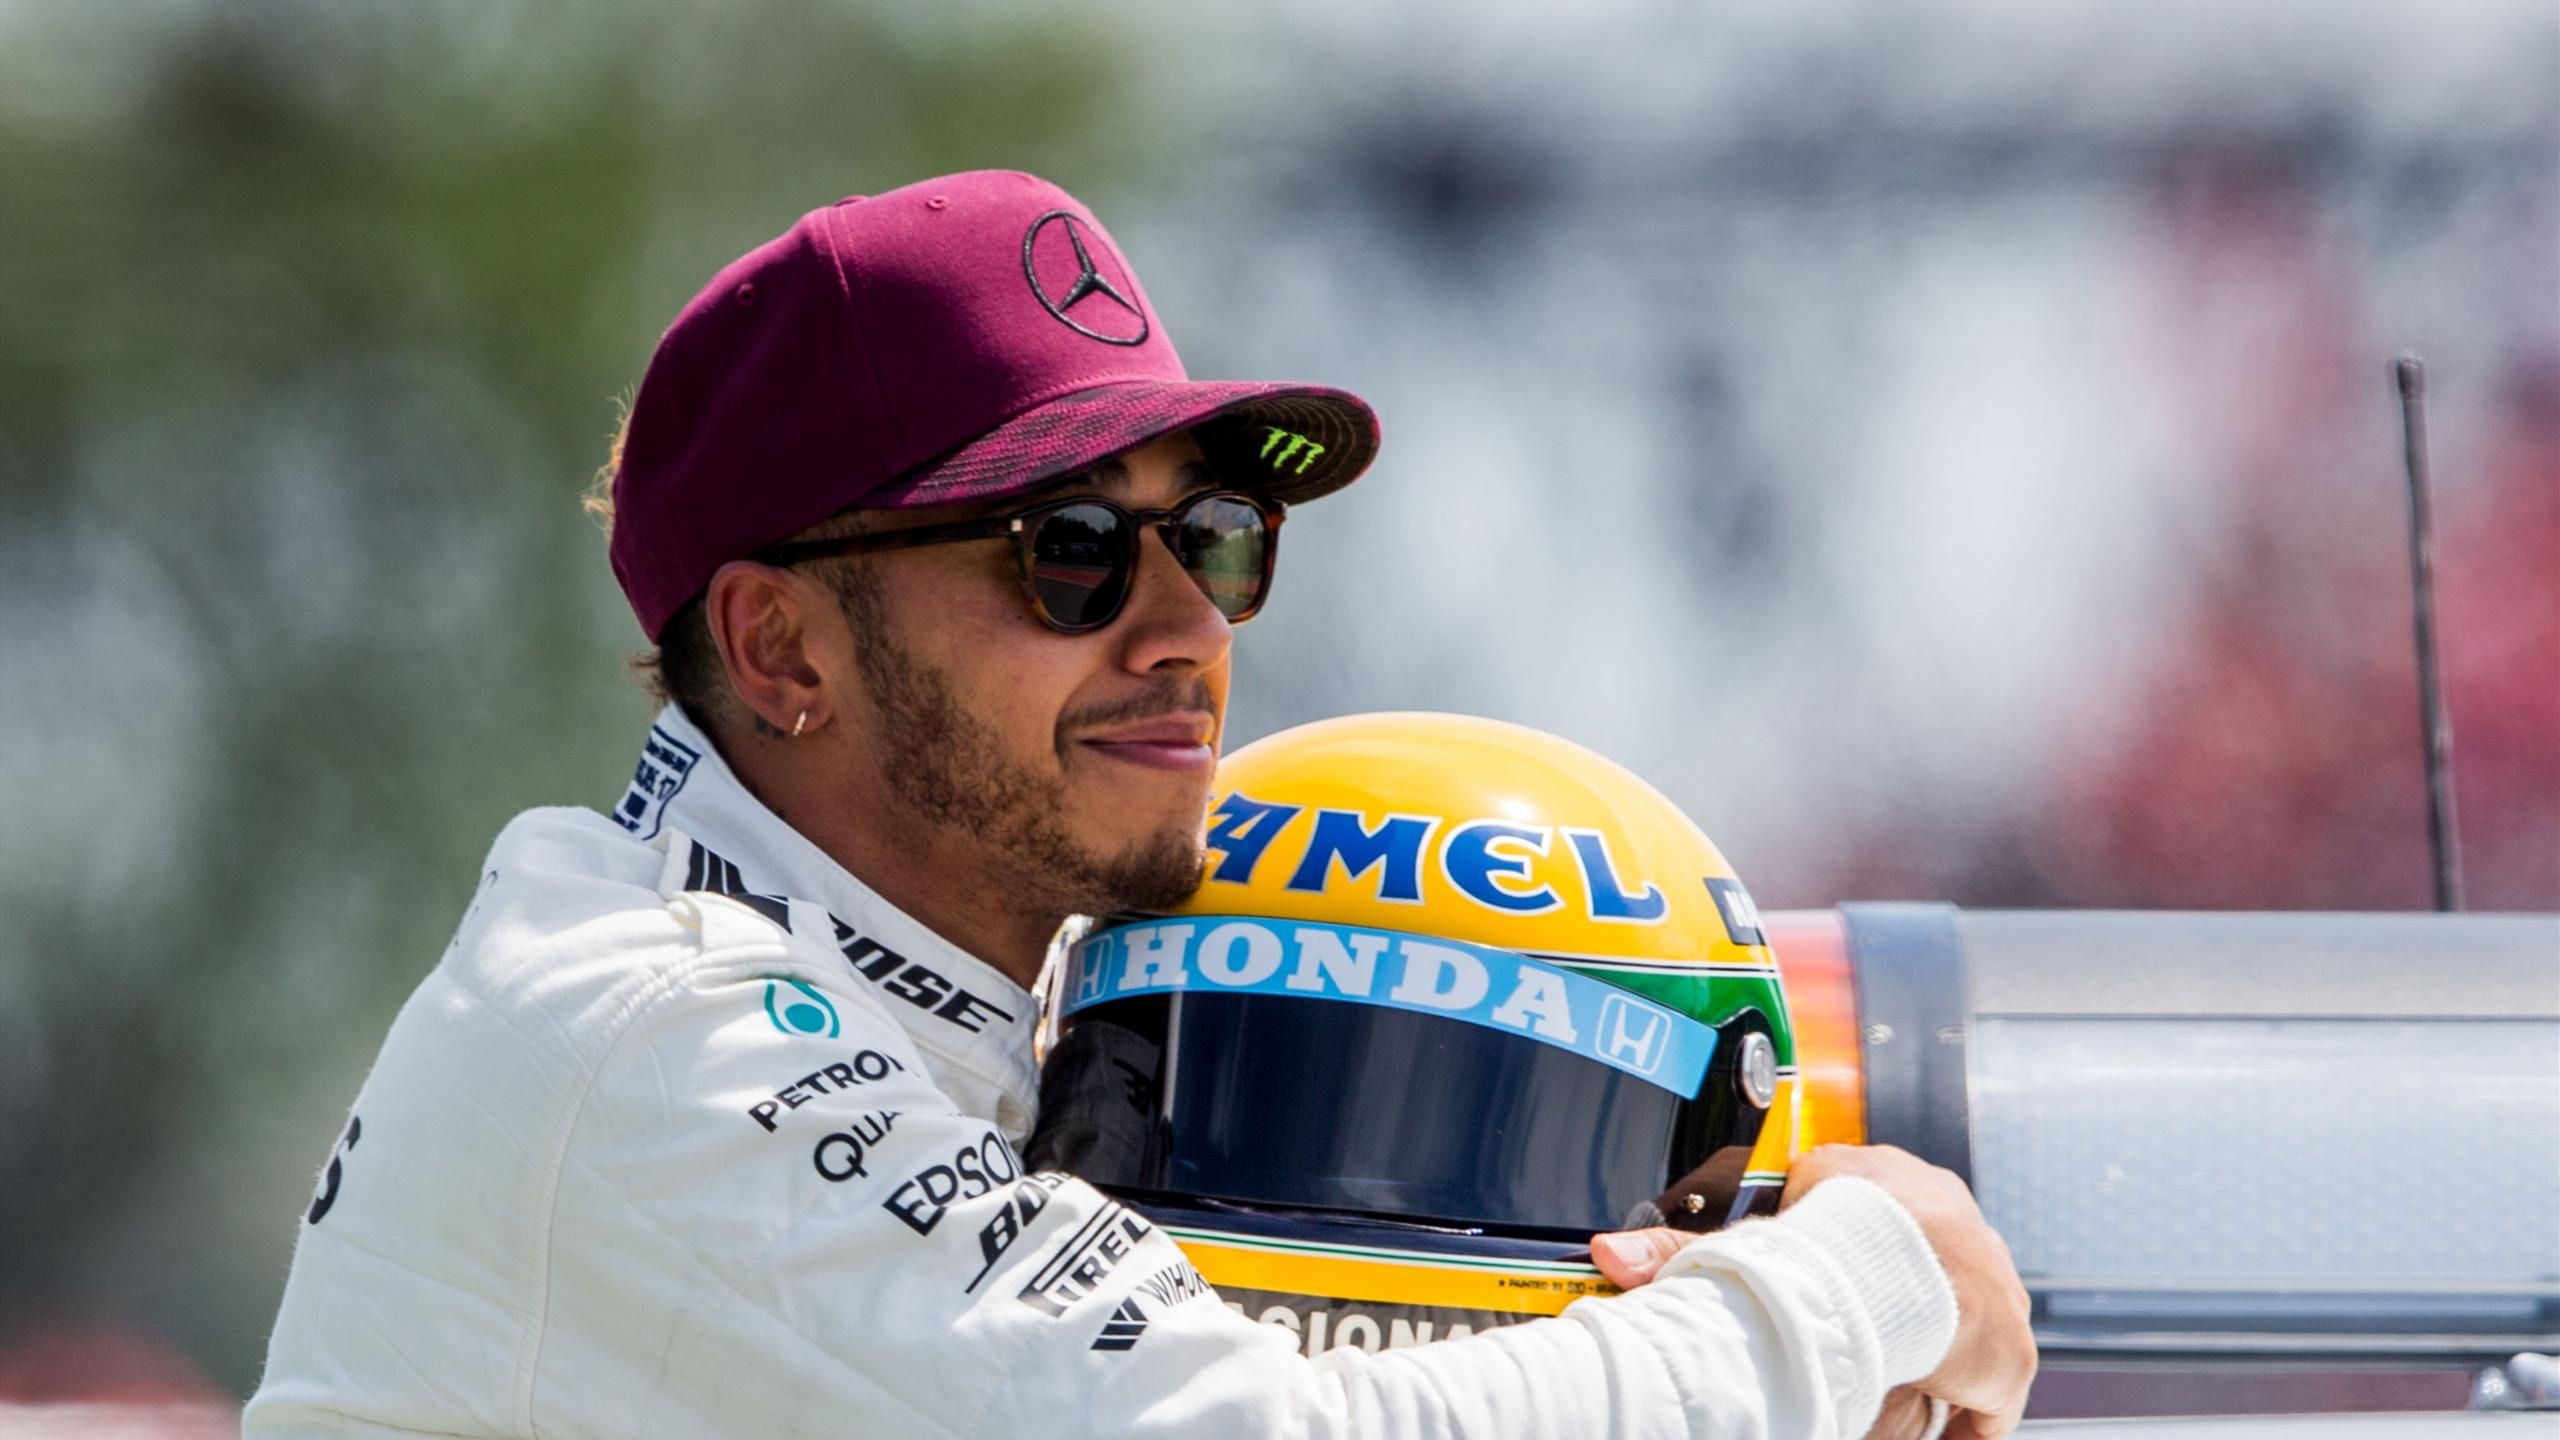 Why Lewis Hamilton dons yellow helmet? Exploring the meaning behind his